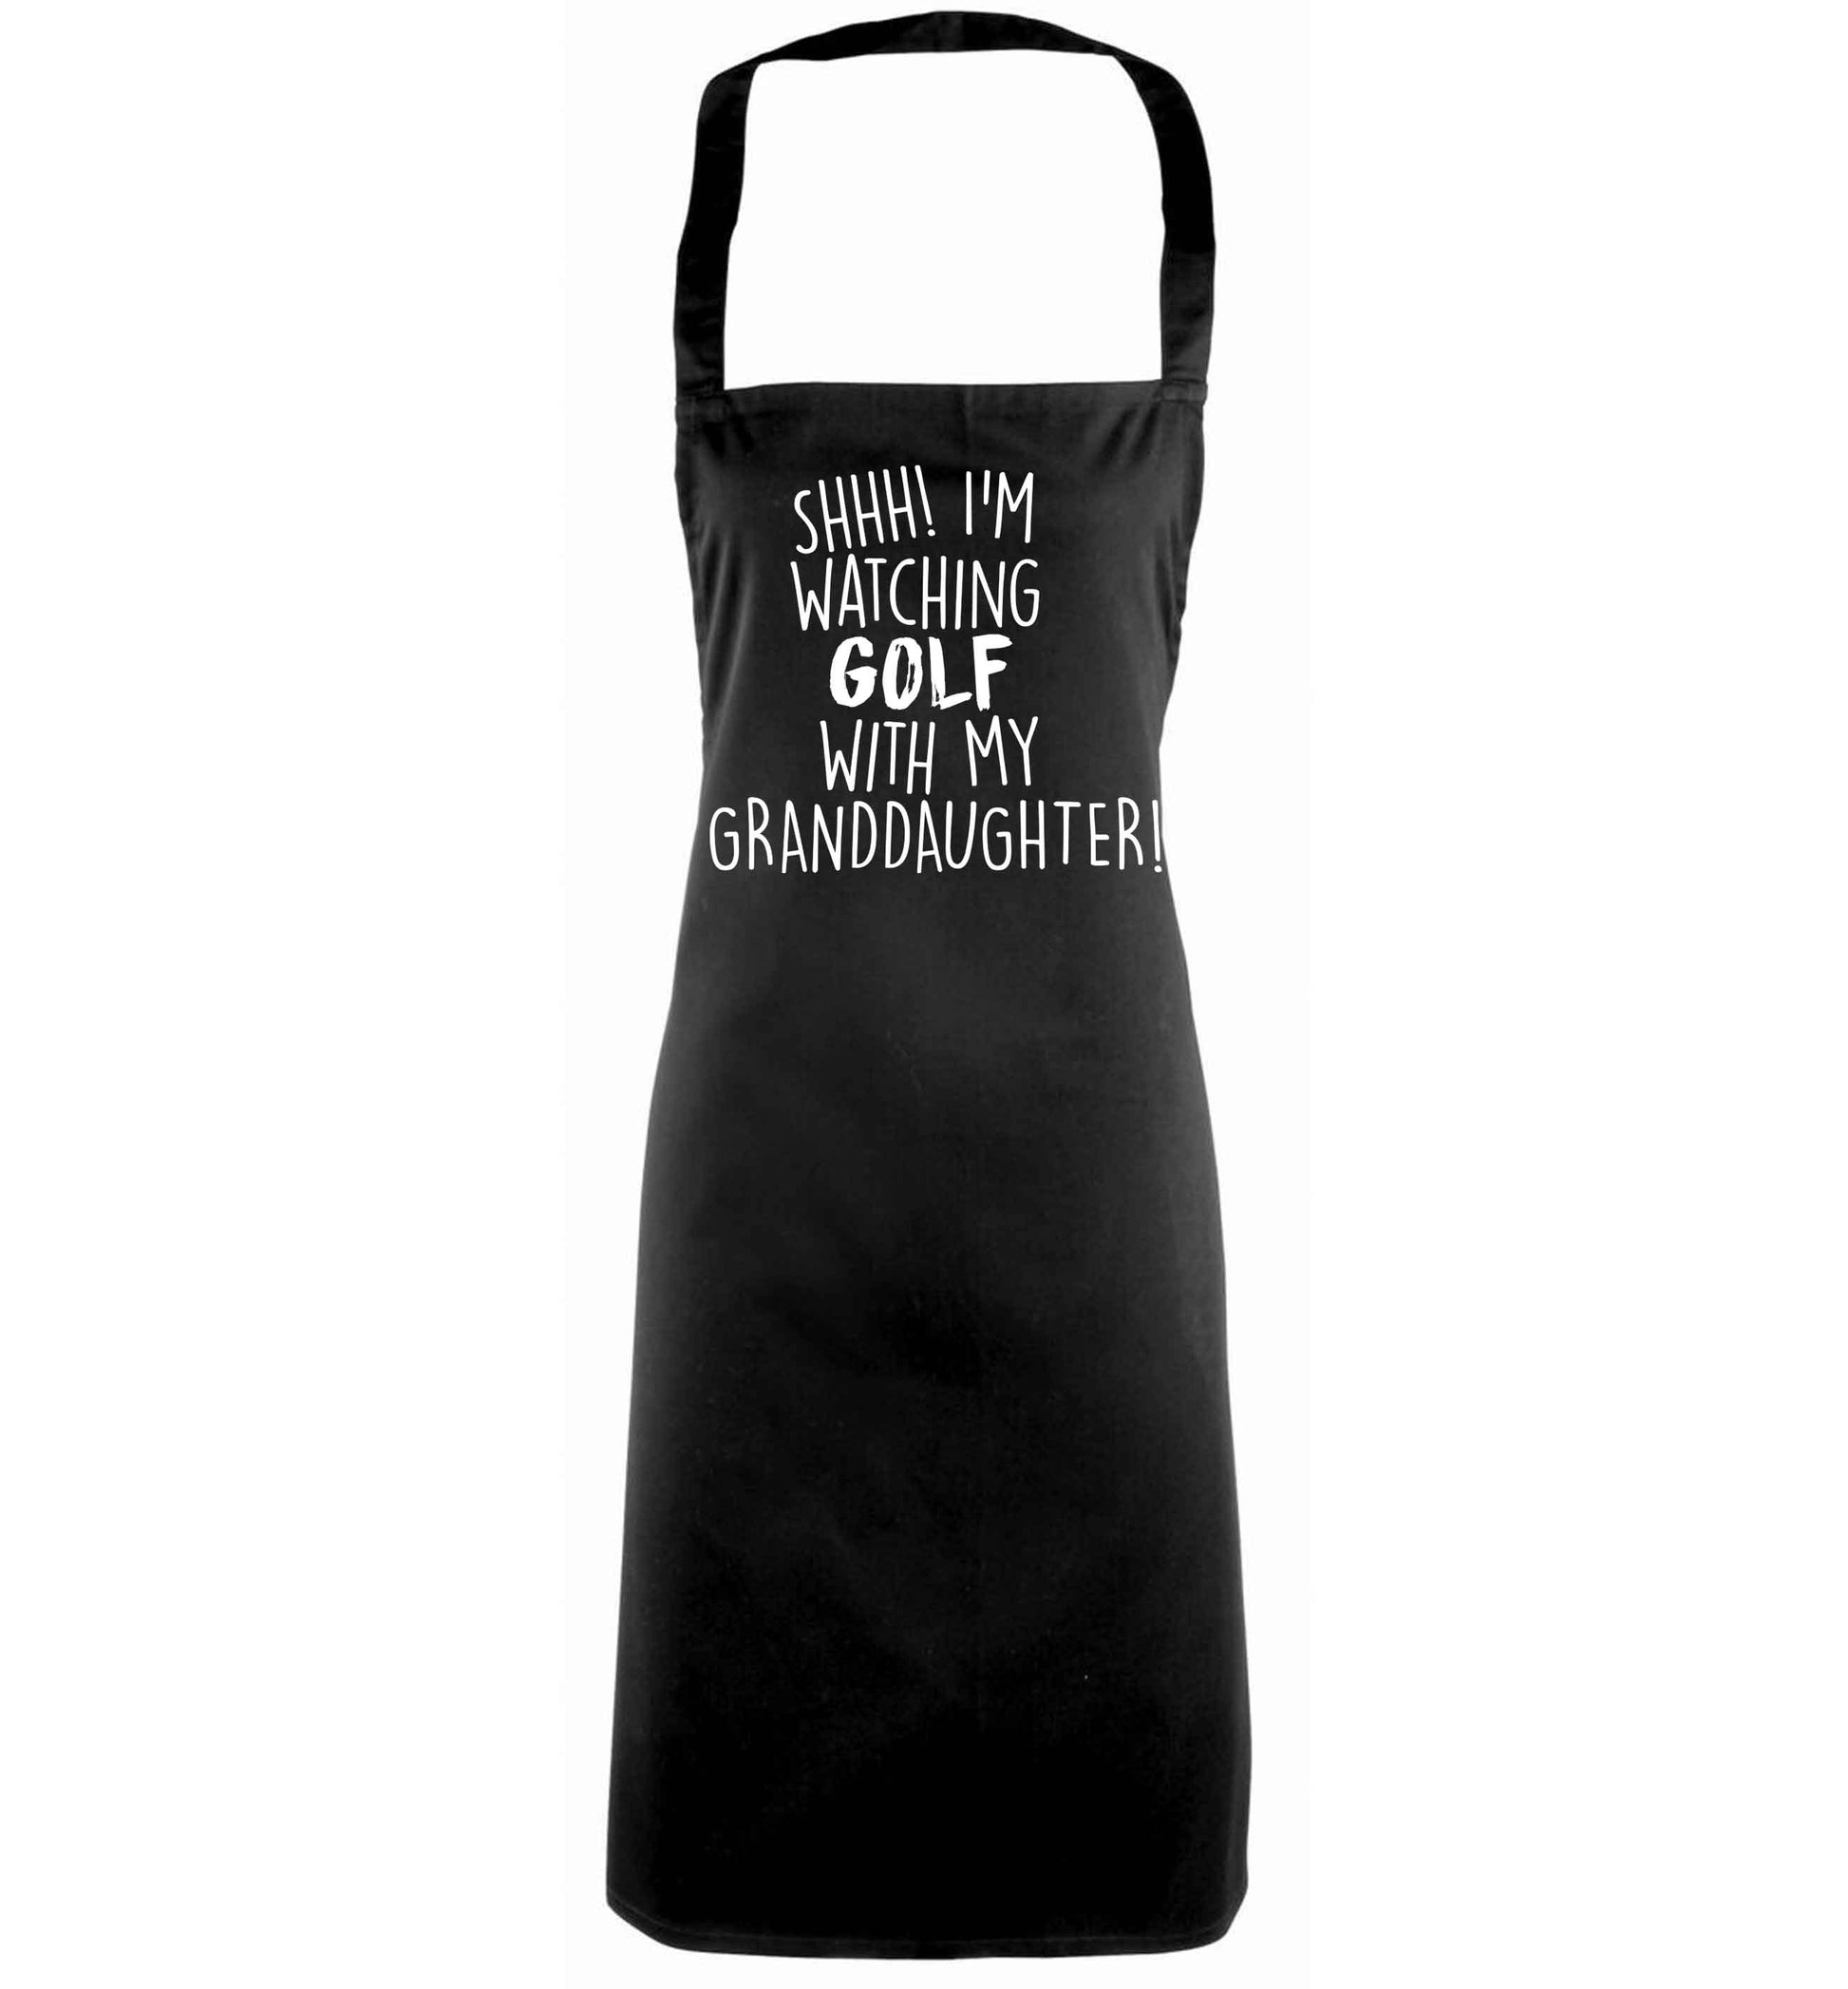 Shh I'm watching golf with my granddaughter black apron